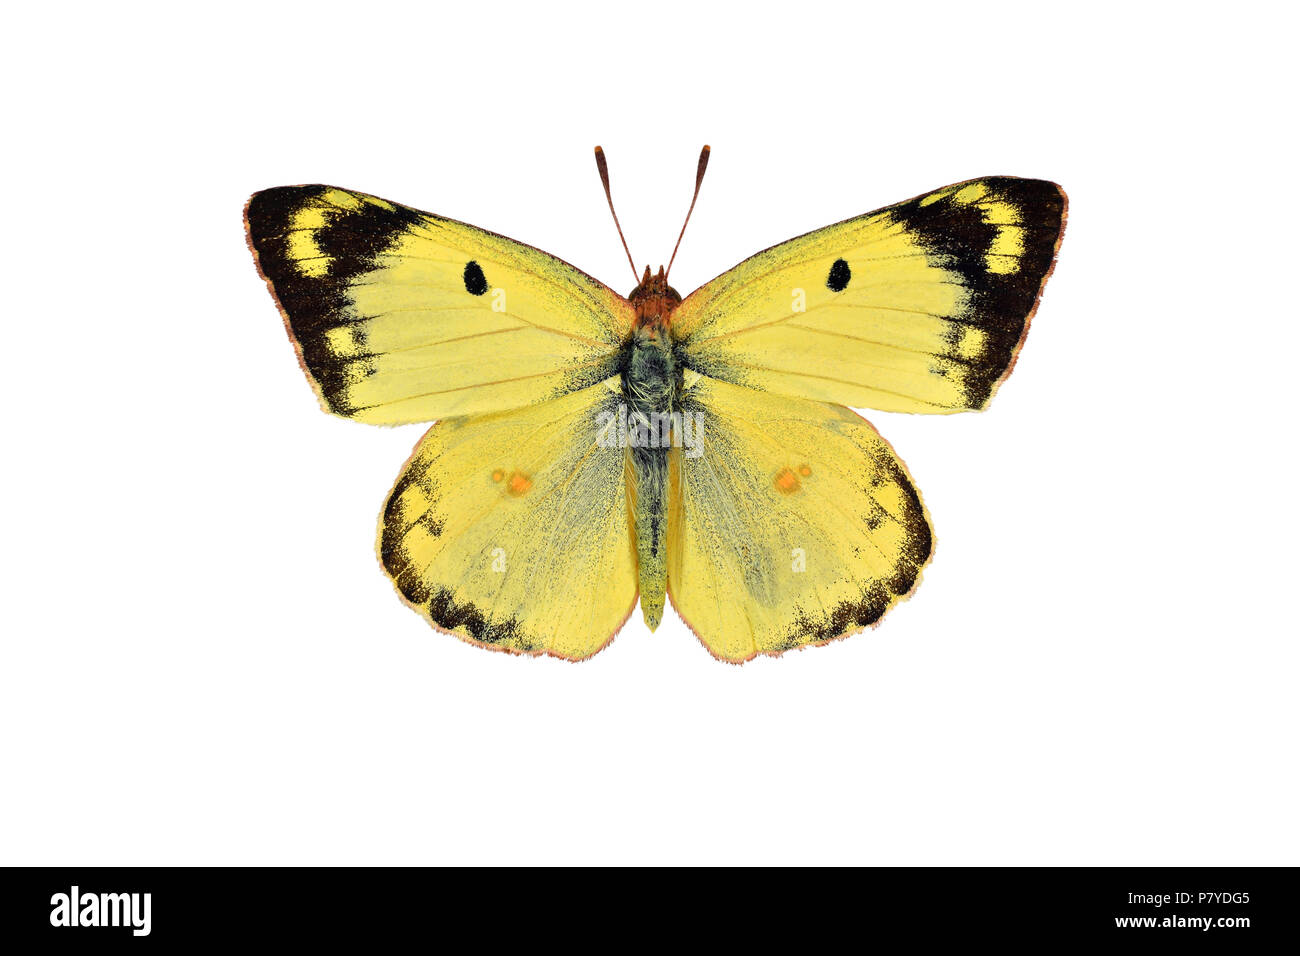 Pale clouded yellow butterfly, isolated on a white background Stock Photo